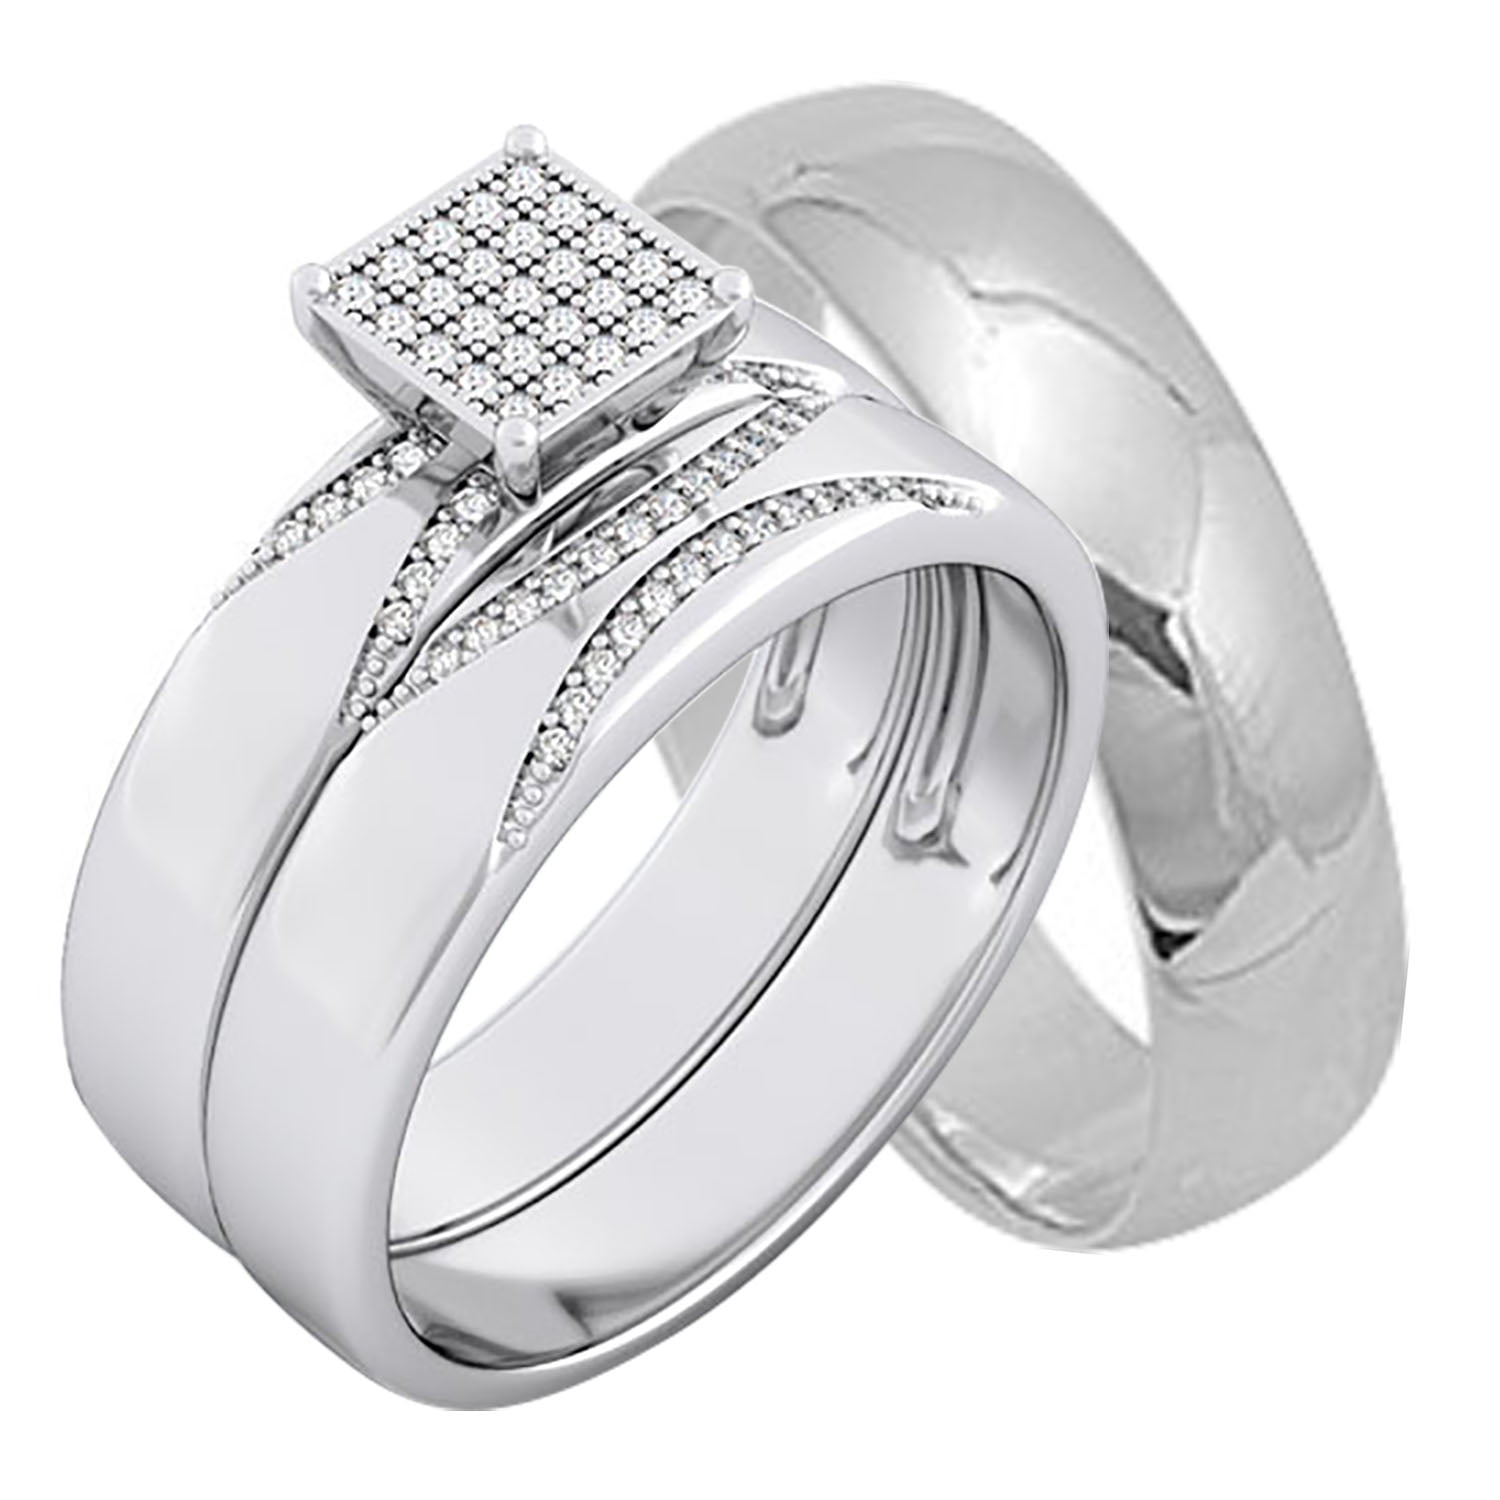 Prudence 1 1/2 ct tw. Lab Round Solitaire Diamond Matching Trio Ring Set  14K White Gold - My Trio Rings